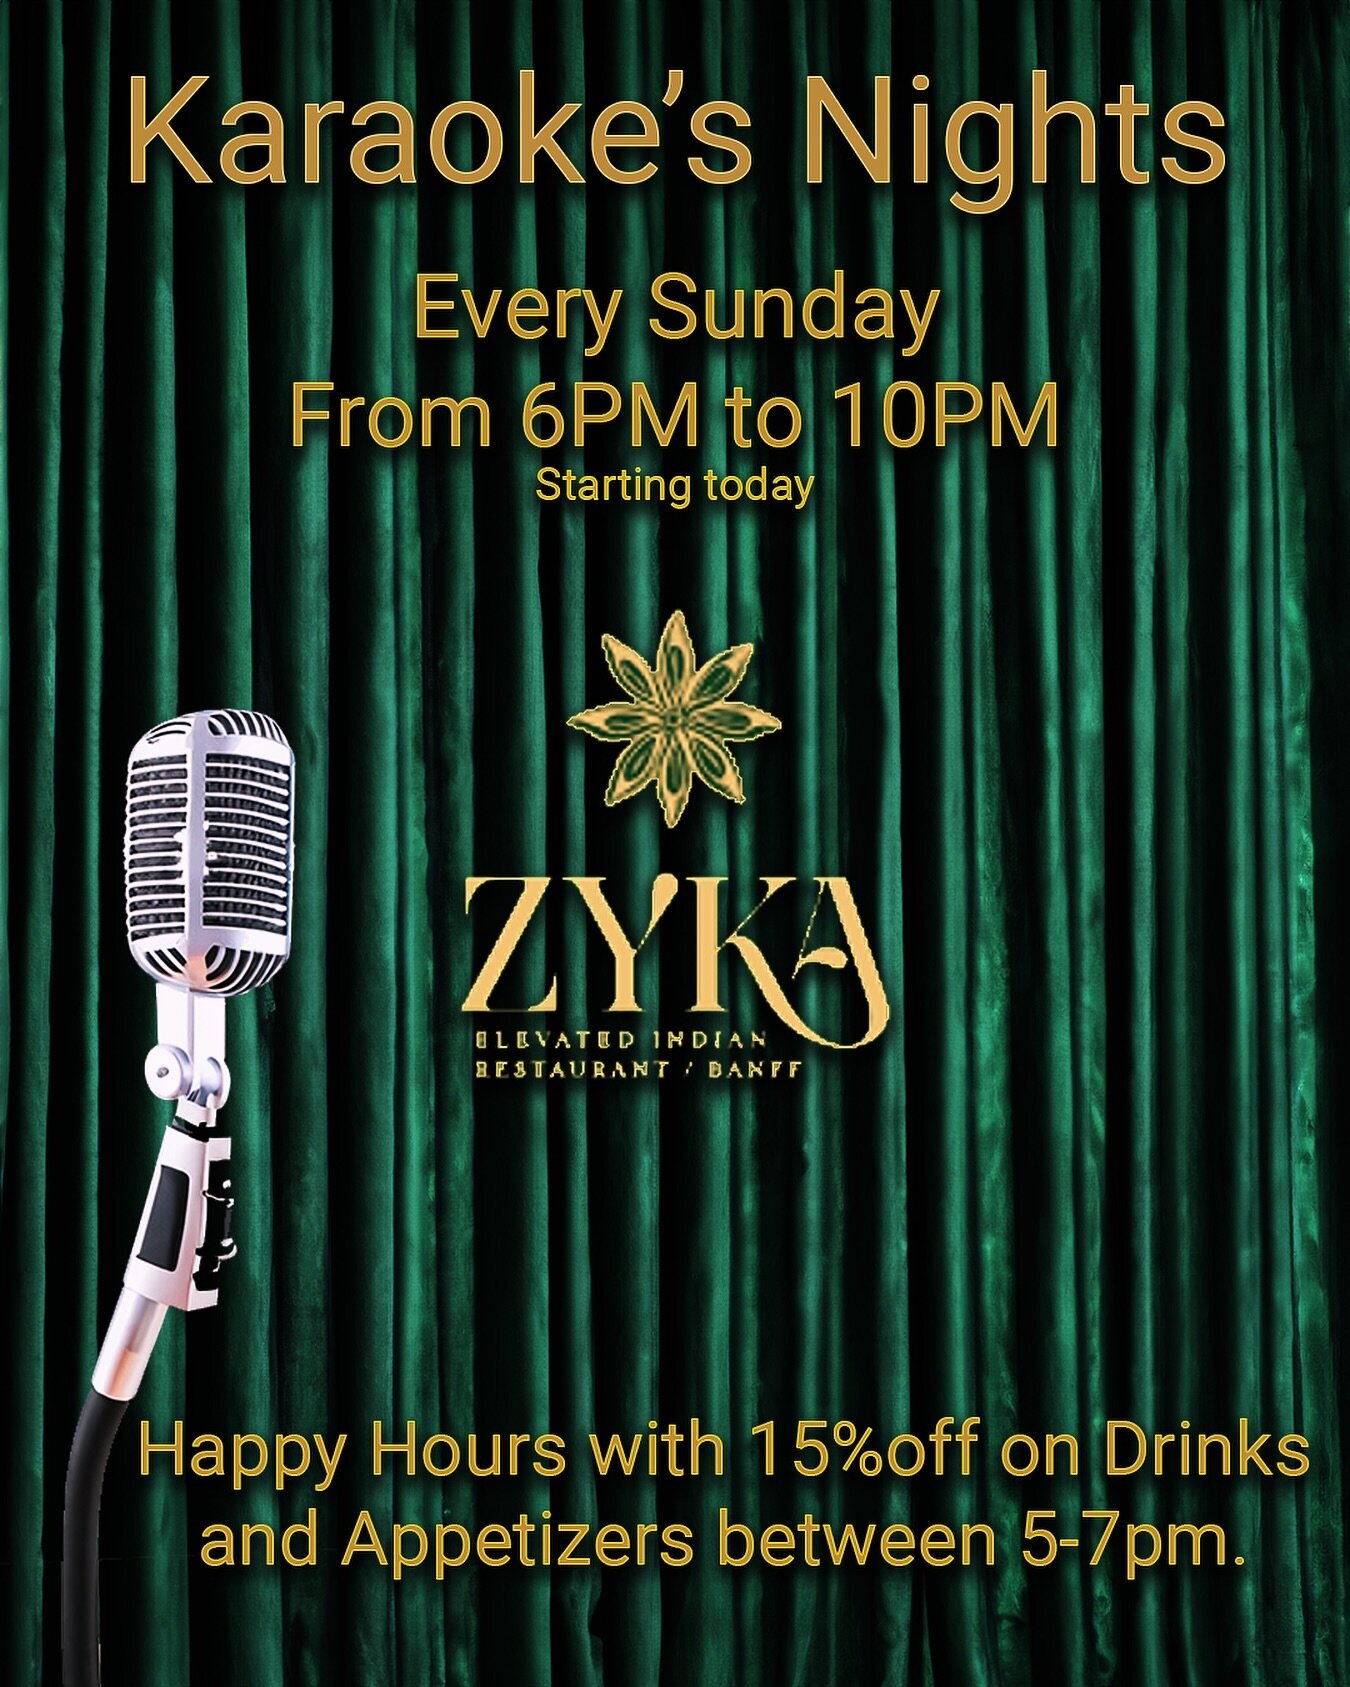 Get your vocal cords ready for the best Sunday Funday in town! Our Karaoke Night on Sunday offers the perfect combination of a VIP room, happy hour specials, and of course, karaoke. 
Come join us between 6-10pm and take advantage of our 15% off on dr